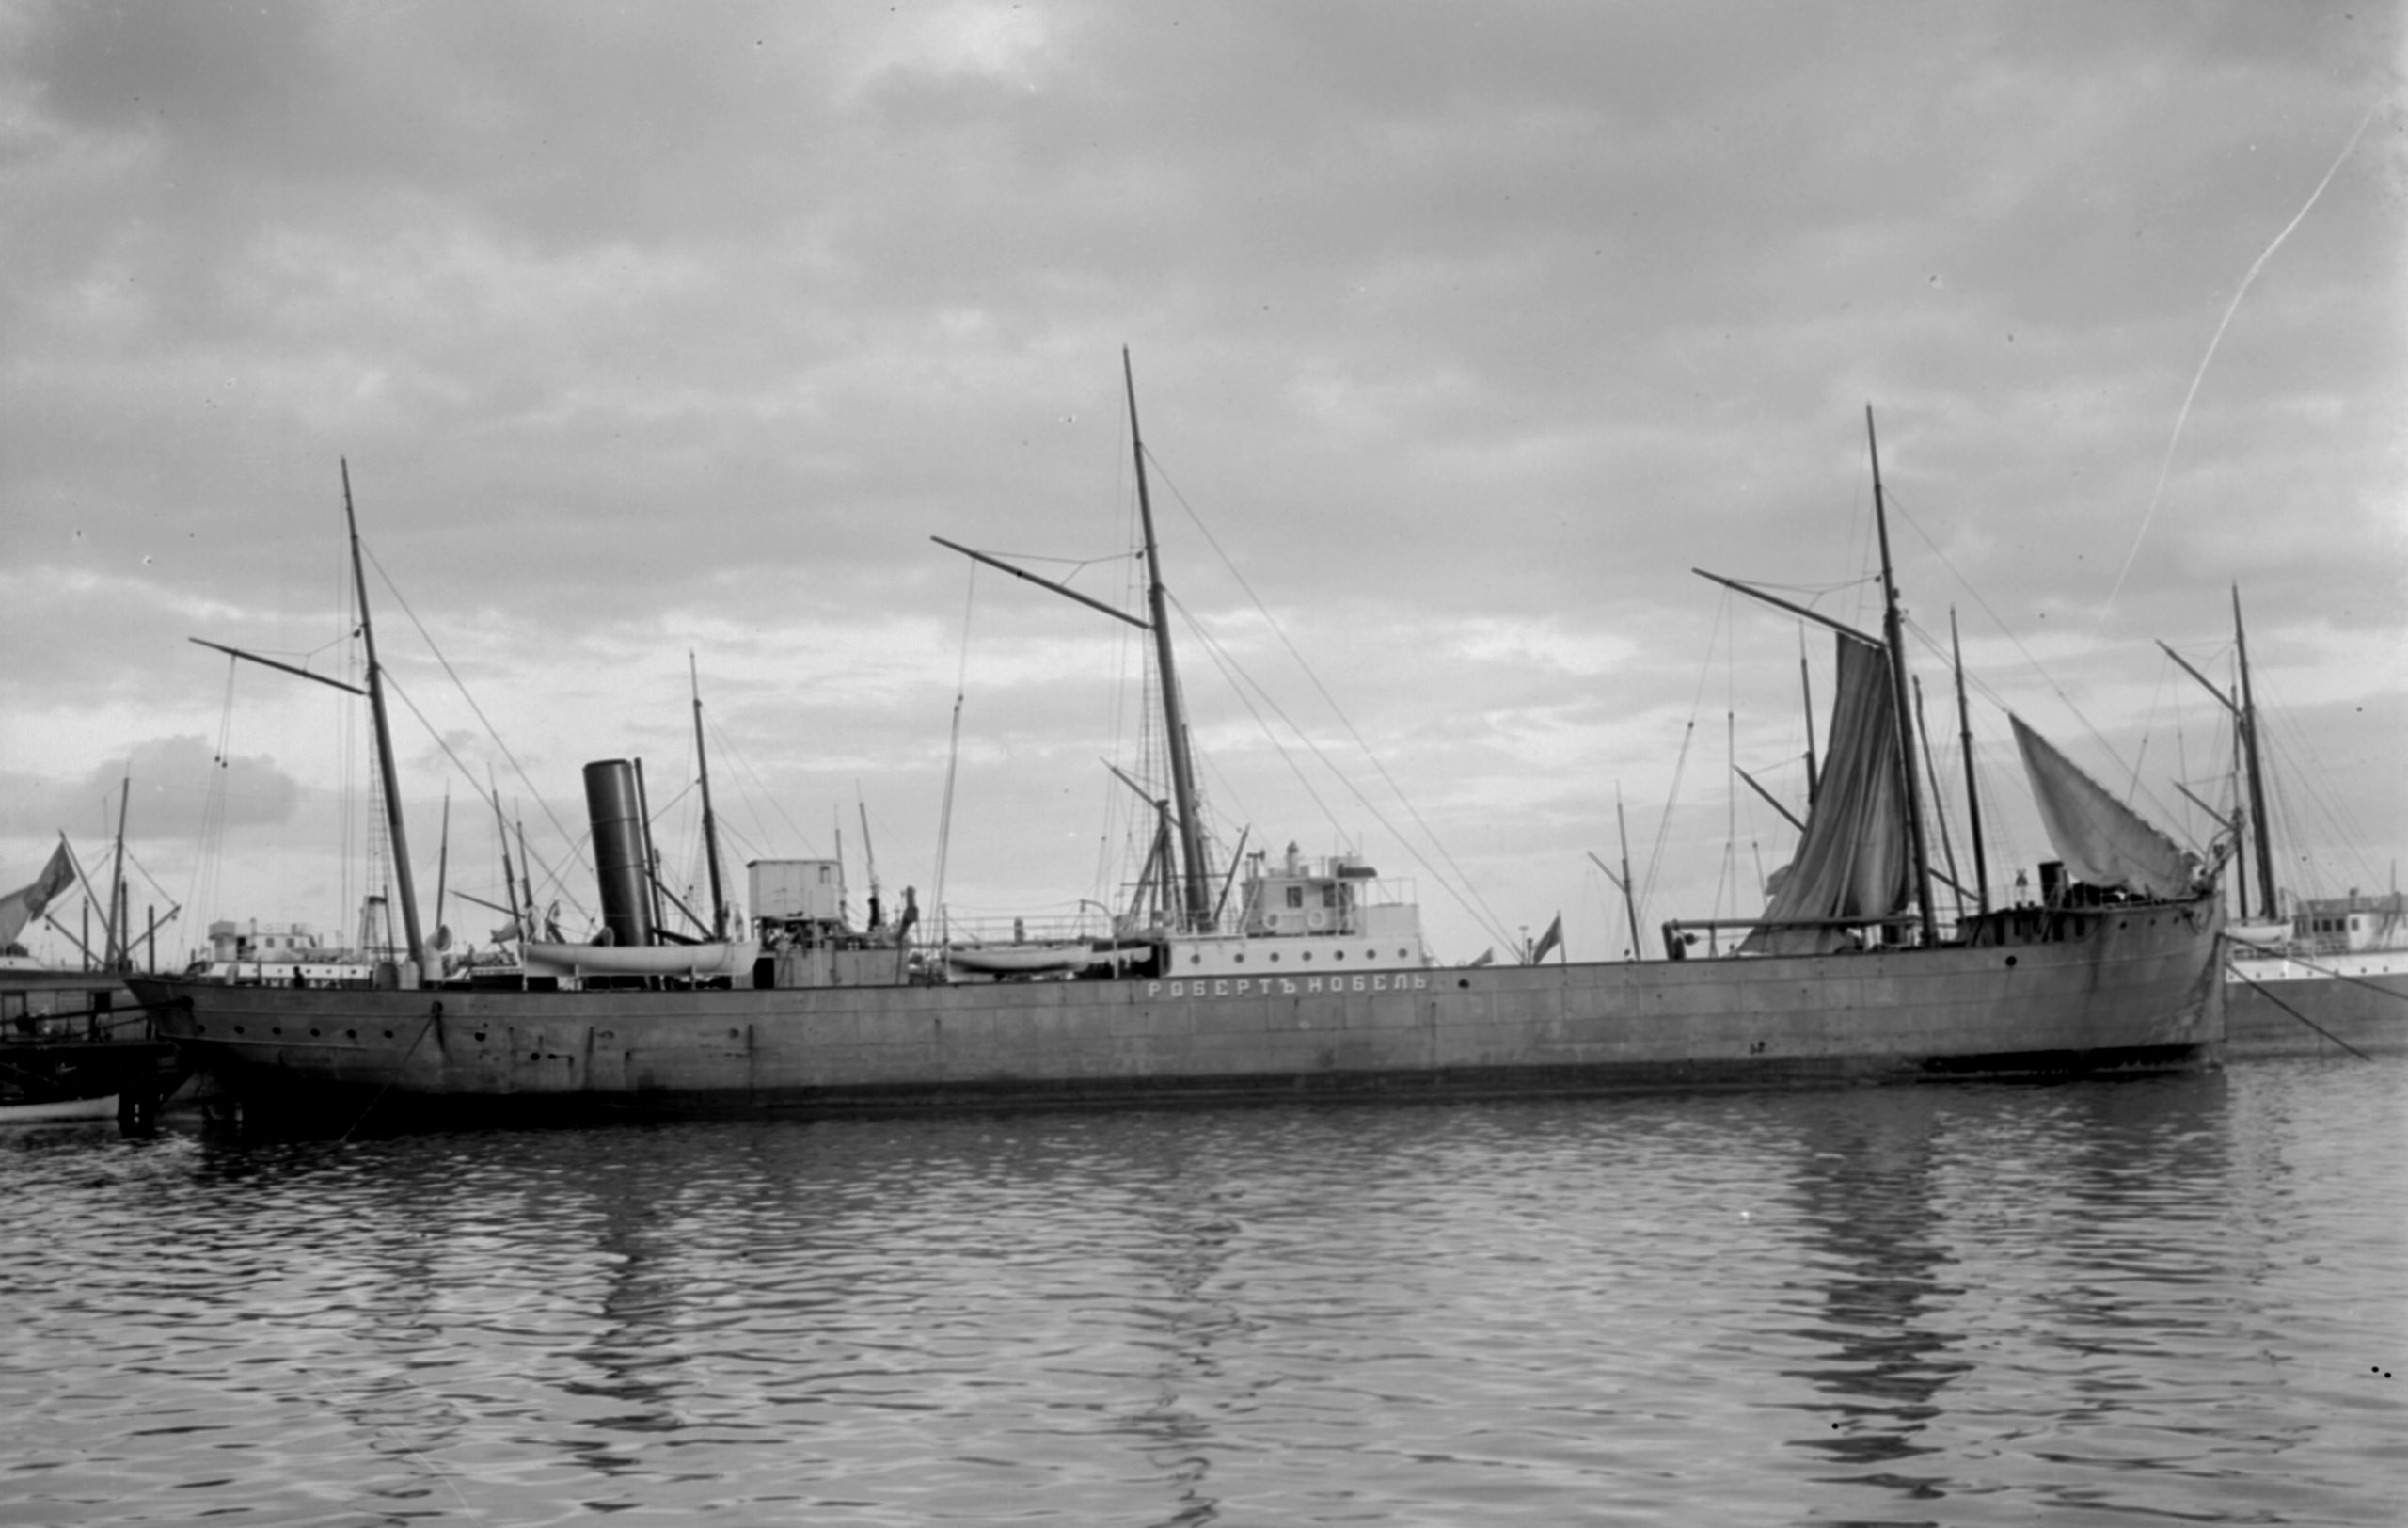 A steamship, possibly retrofitted with a diesel engine. Rudolf Diesel believed the diesel engine would eventually be suitable for larger ships.